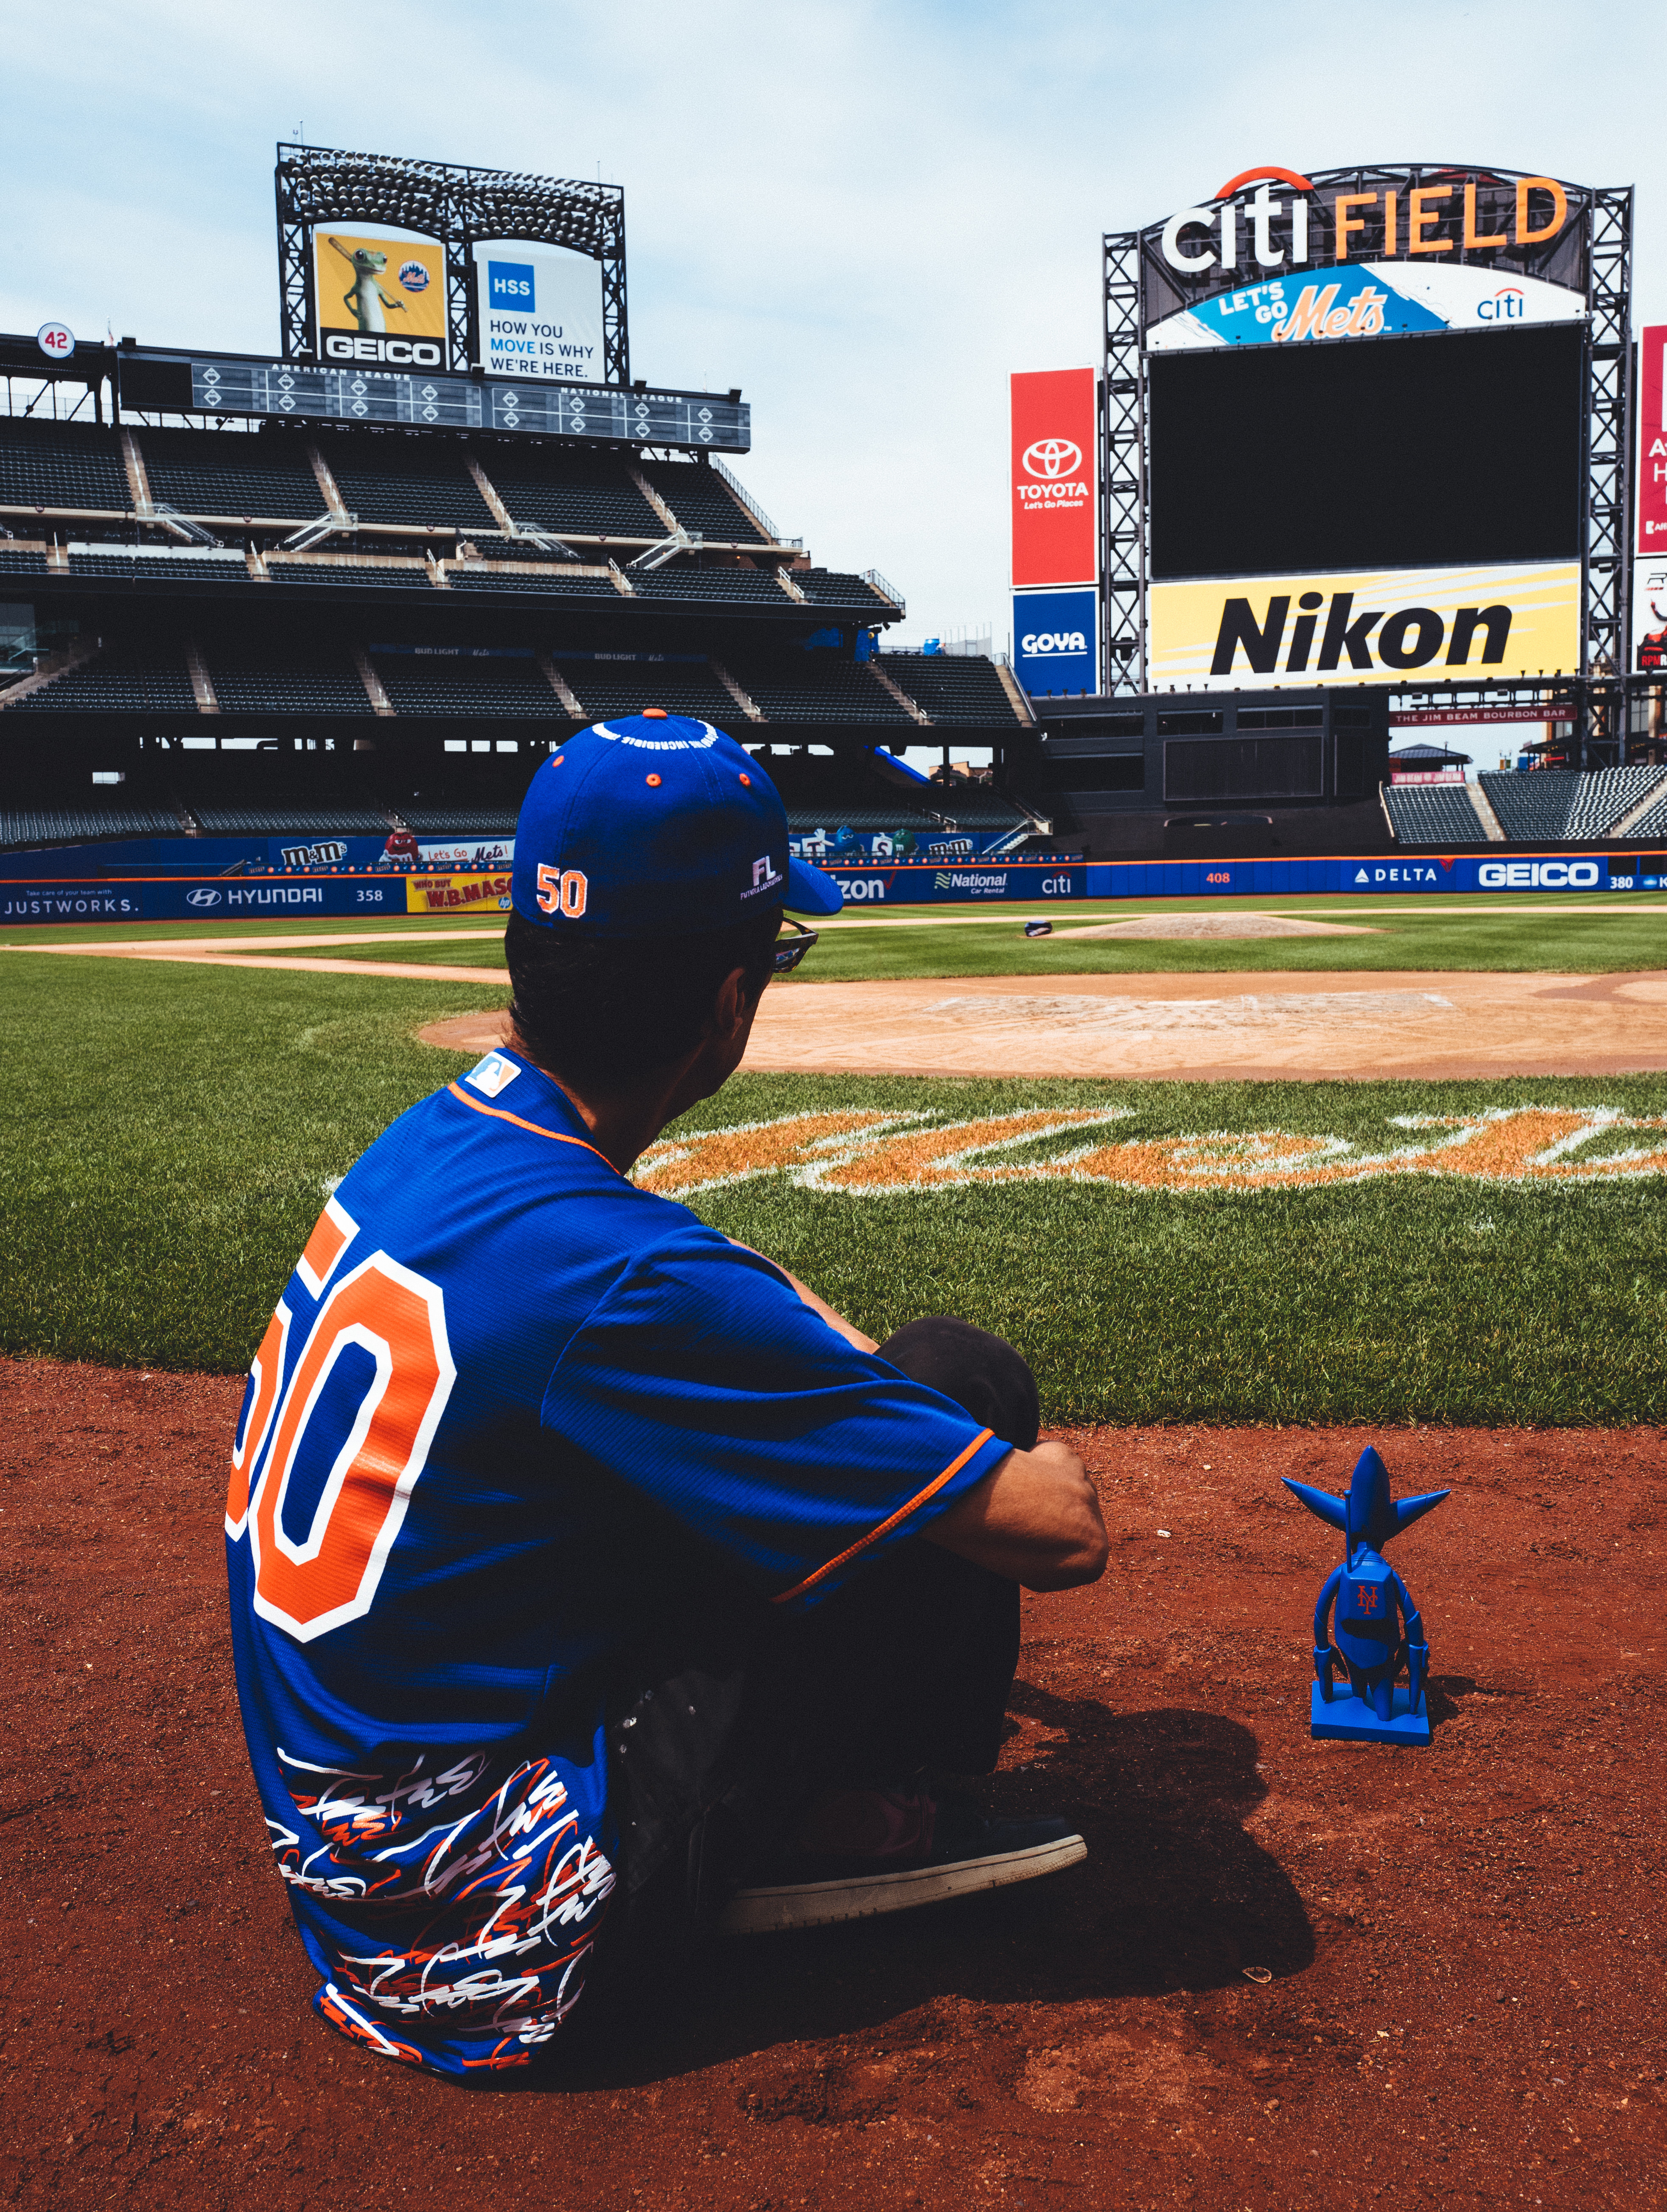 Futura 2000 x New York Mets Capsule Collection